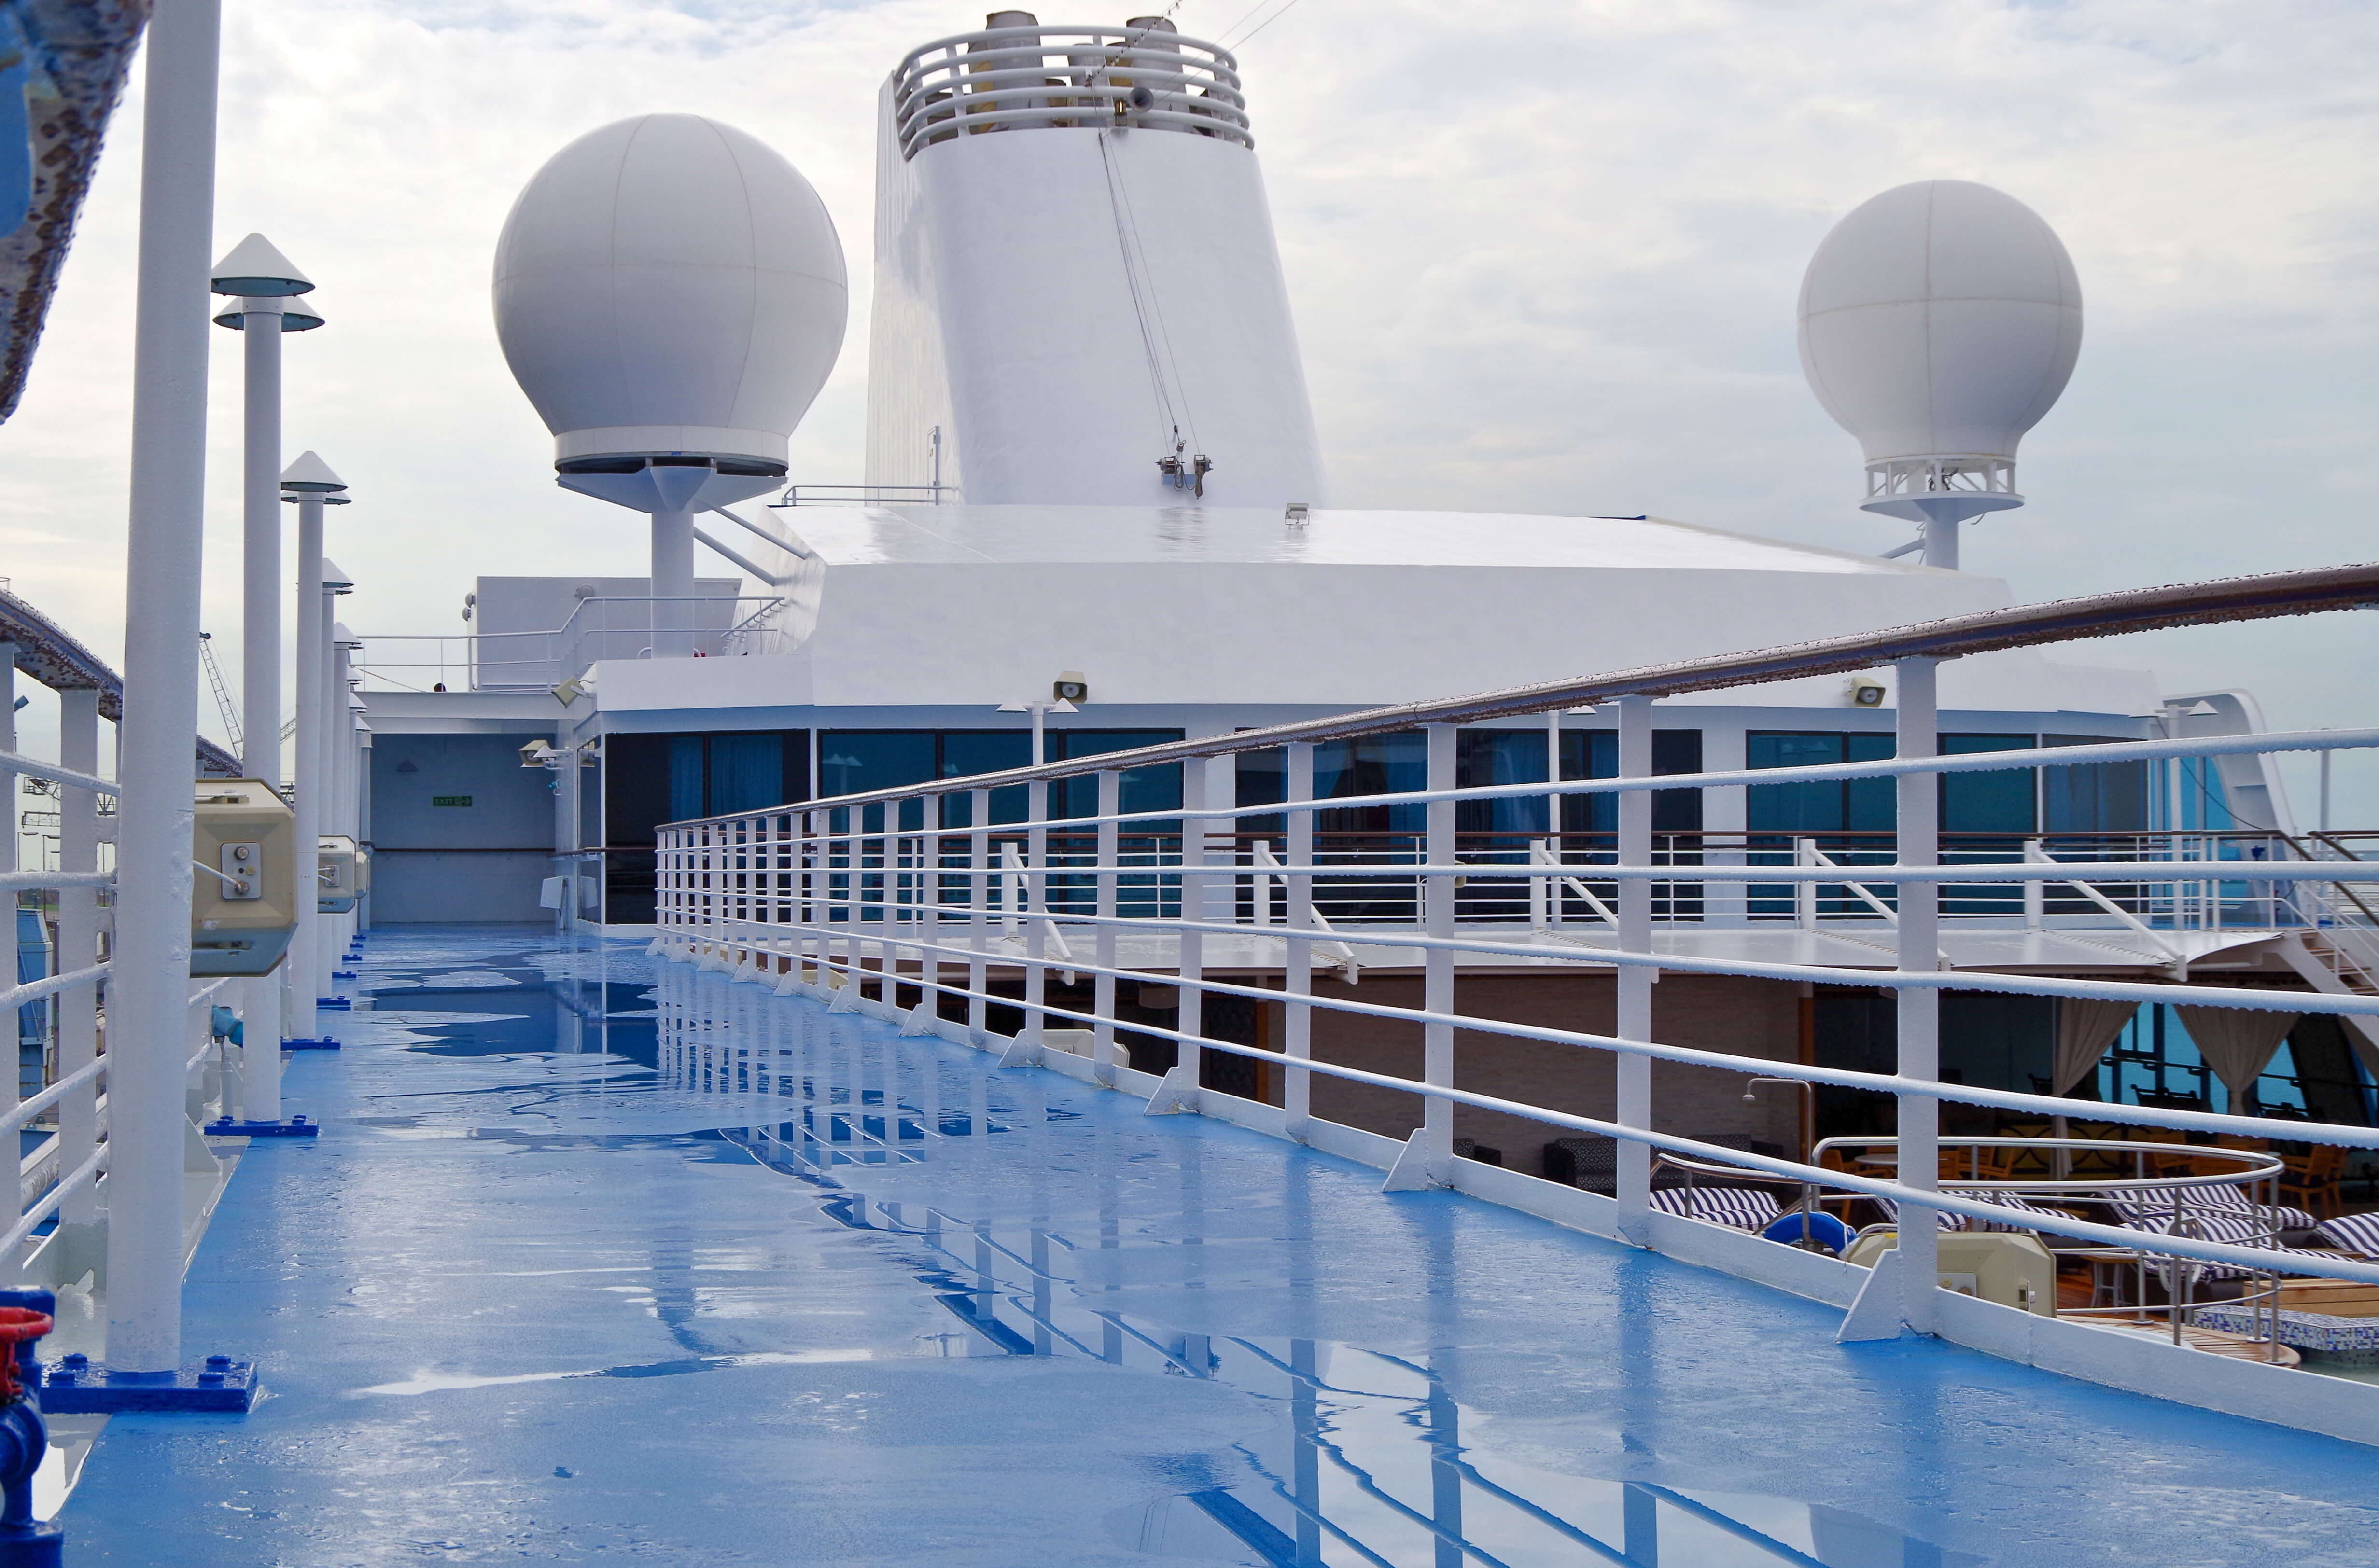 Do I Need a Personal Injury Attorney If I Get Injured on a Cruise Ship?